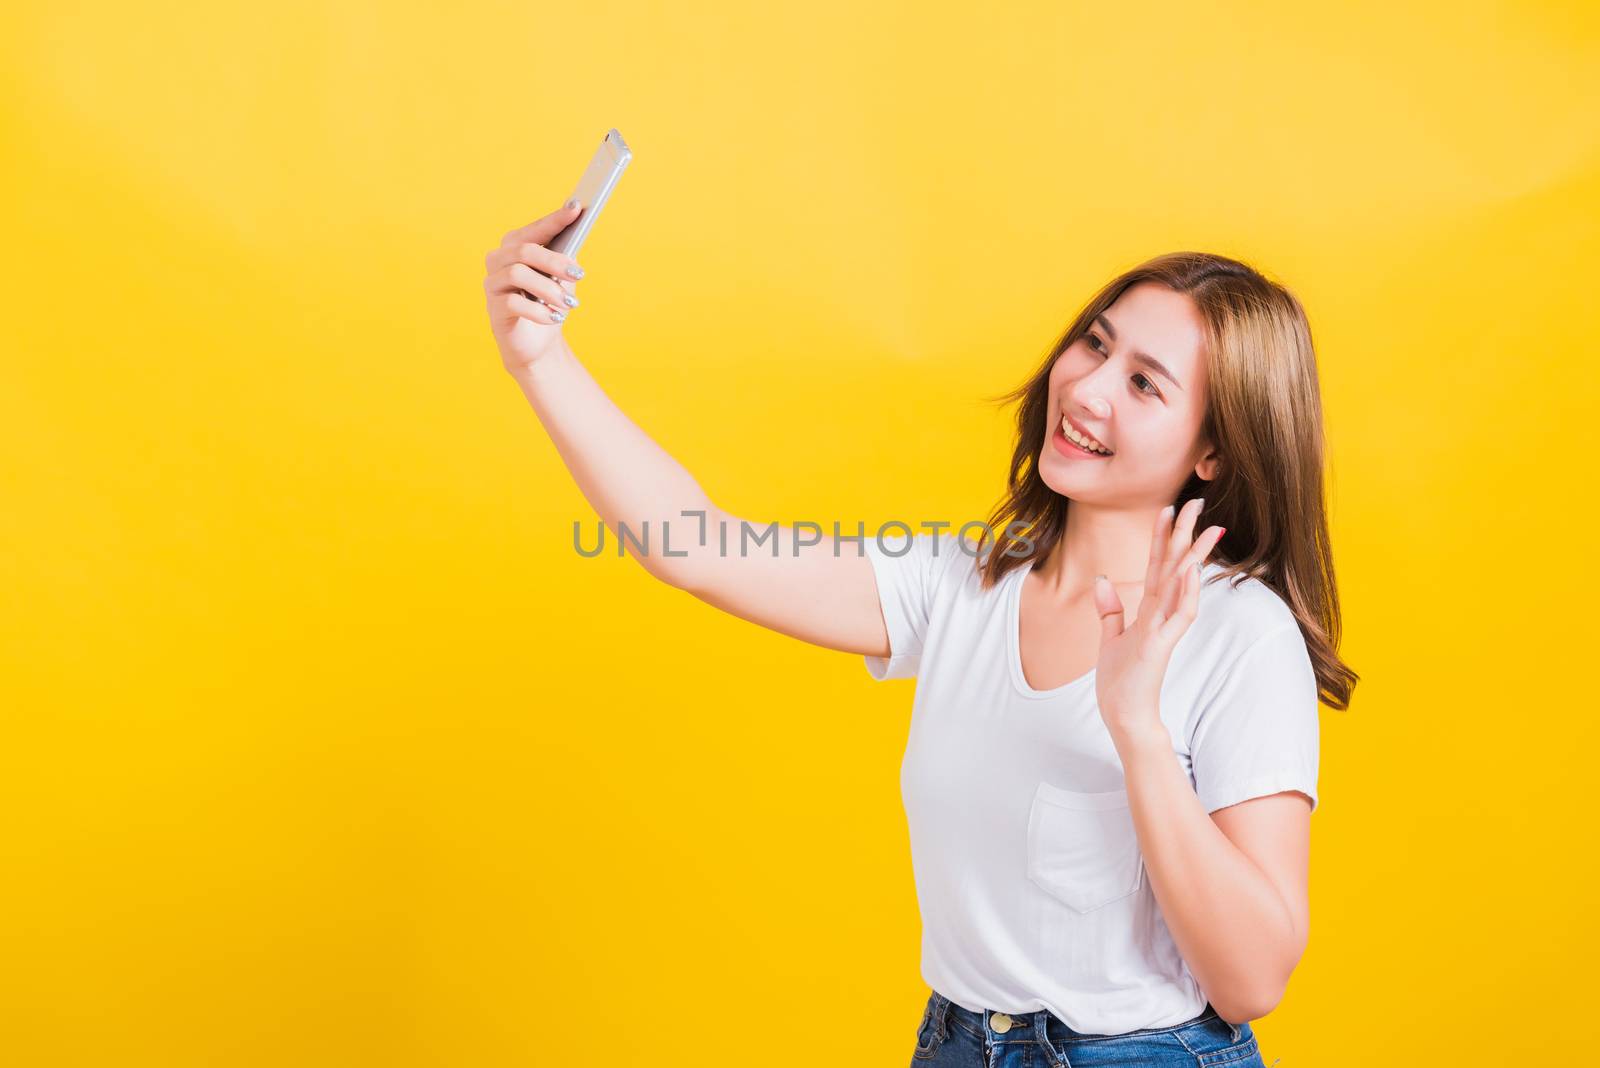 Asian Thai portrait happy beautiful young woman smiling making selfie photo or video call on smartphone she raise hand to say hello to smartphone, studio shot isolated yellow background and copy space